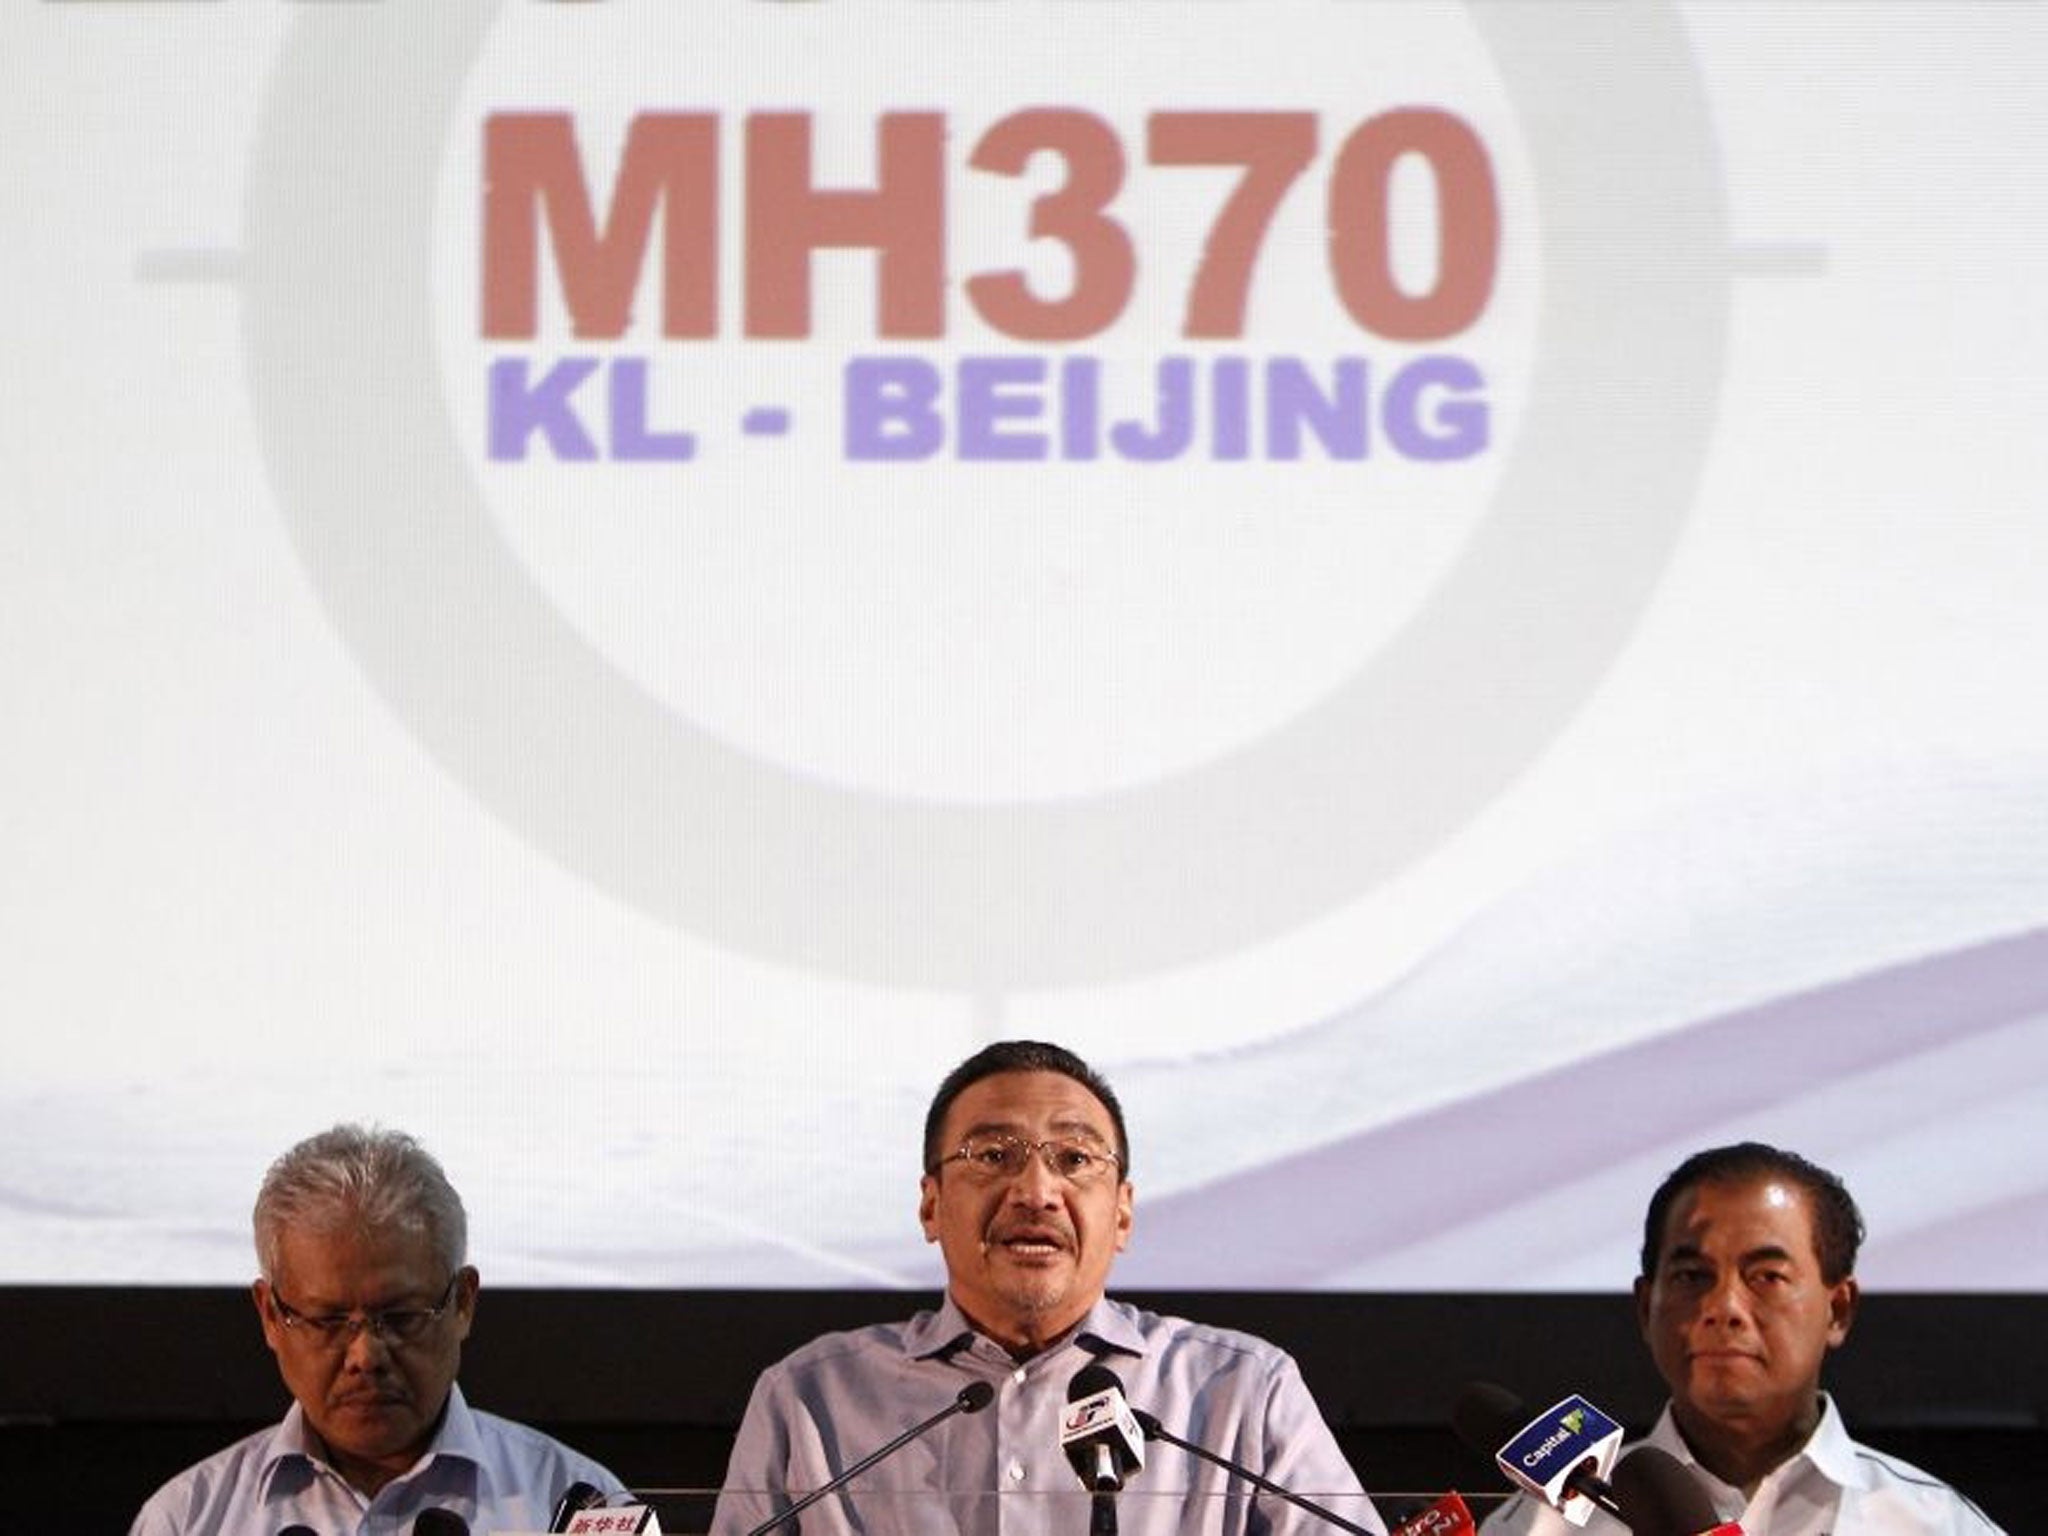 Malaysian acting Transport Minister Hishammuddin Hussein, center, speaks as Malaysian Deputy Foreign Minister Hamzah Zainuddin, left, and Malaysian Deputy Transport Minister Abdul Aziz Kaprawi listen during a press conference for the missing Malaysia Airl